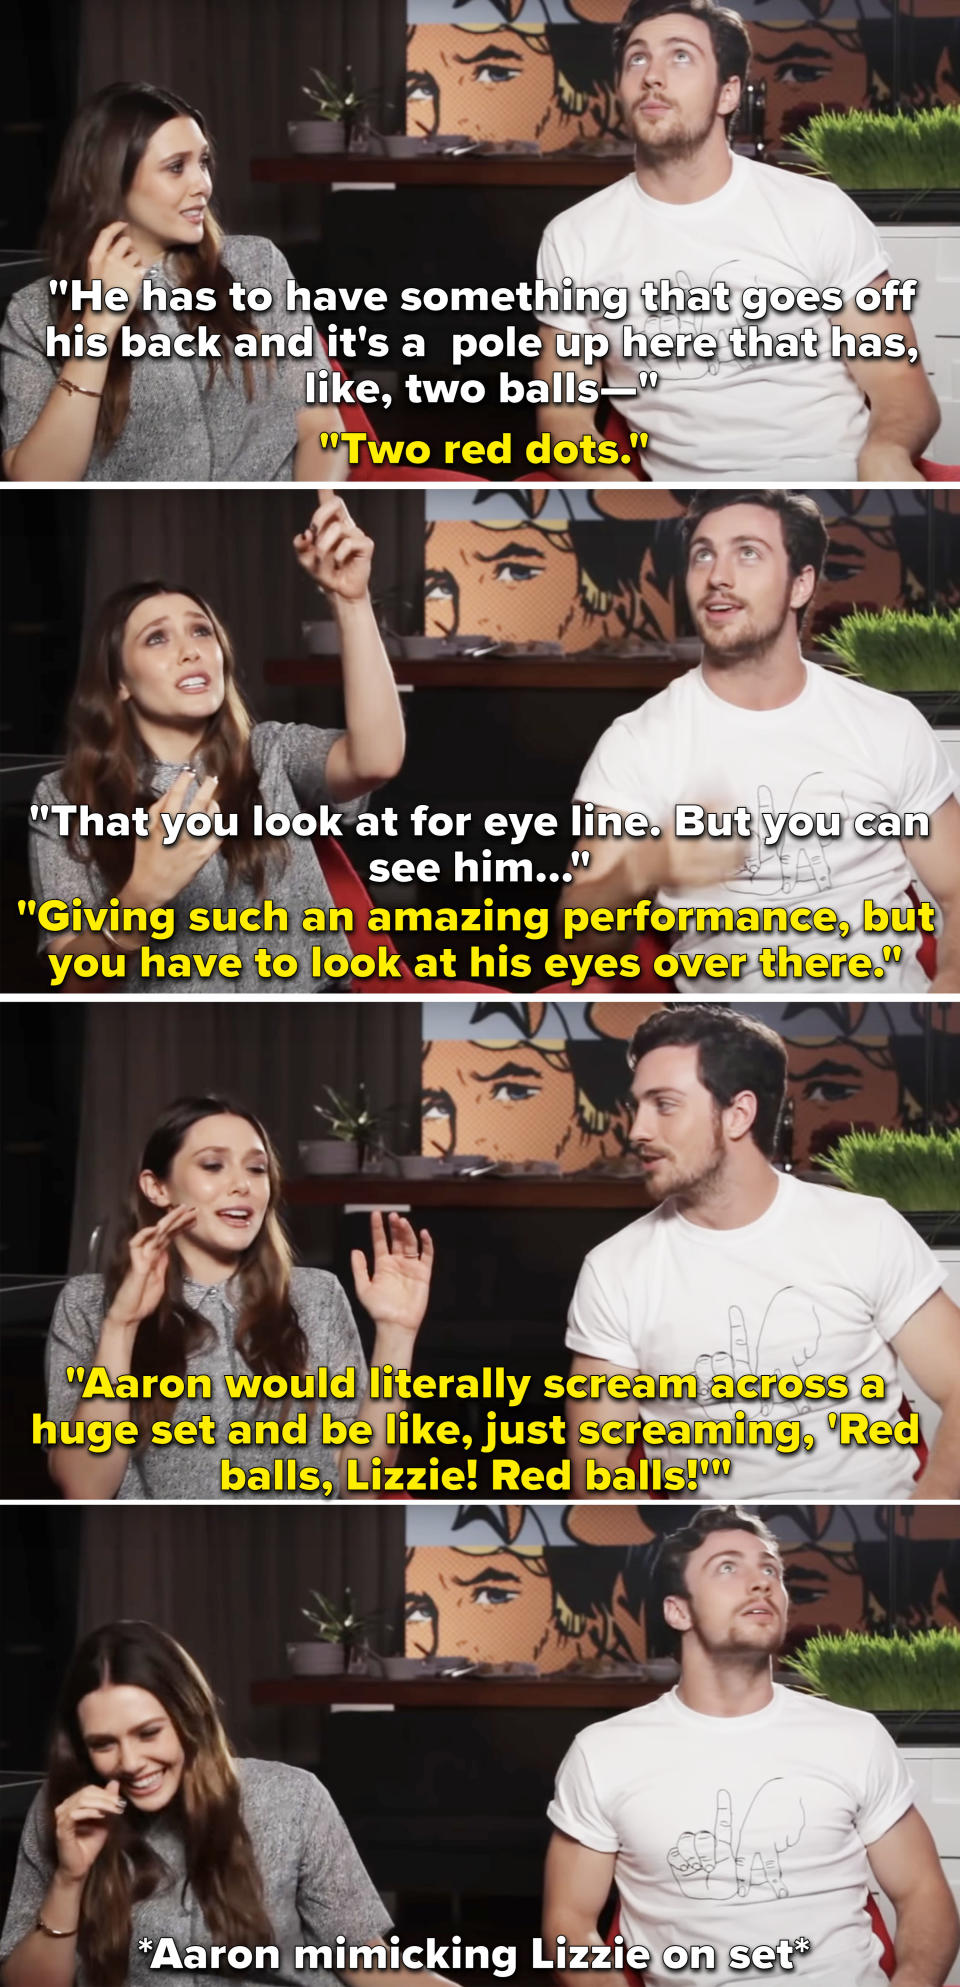 Elizabeth Olsen and Aaron Taylor-Johnson in an interview, with Olsen saying, "Aaron would literally scream across a huge set and be like, just screaming, 'Red balls, Lizzie! Red balls!'"